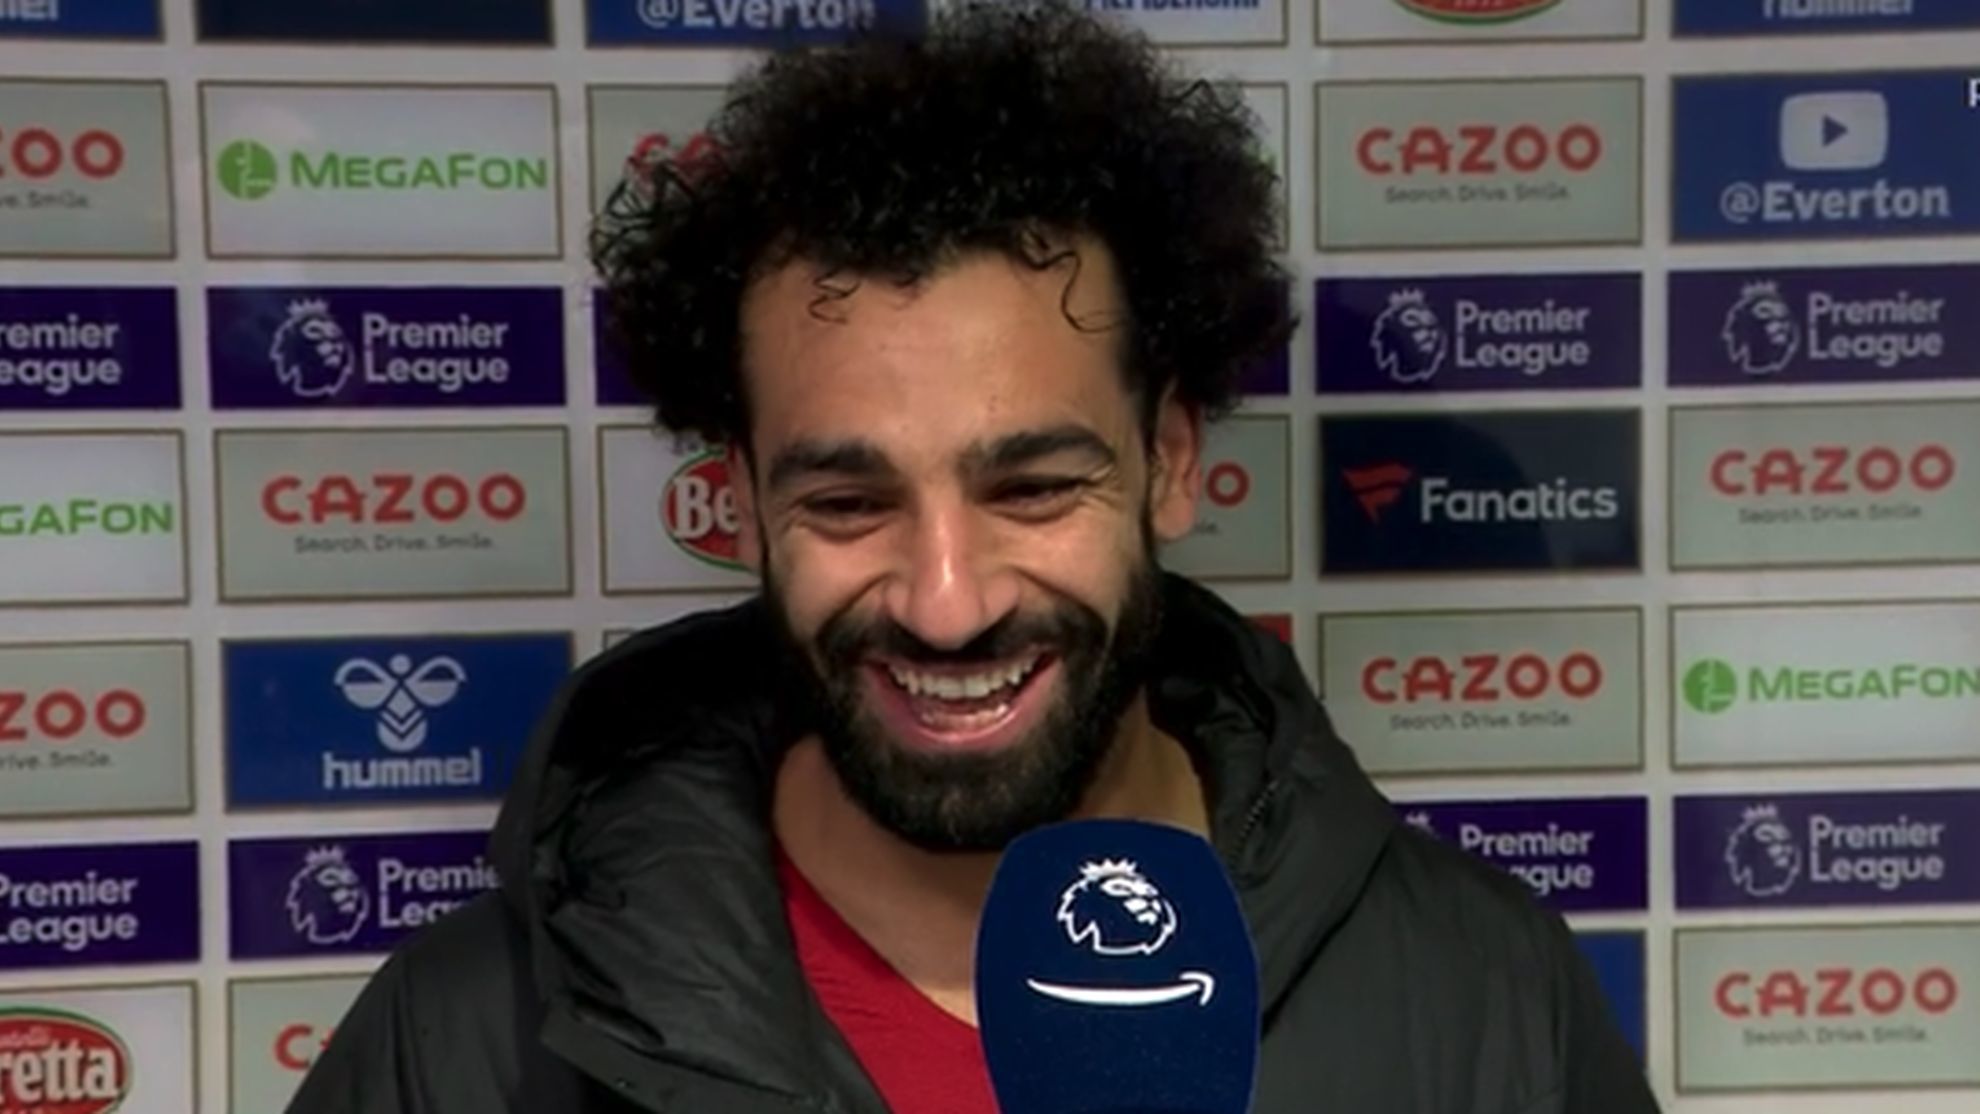 Salah bursts out laughing when his Ballon d'Or ranking is mentioned